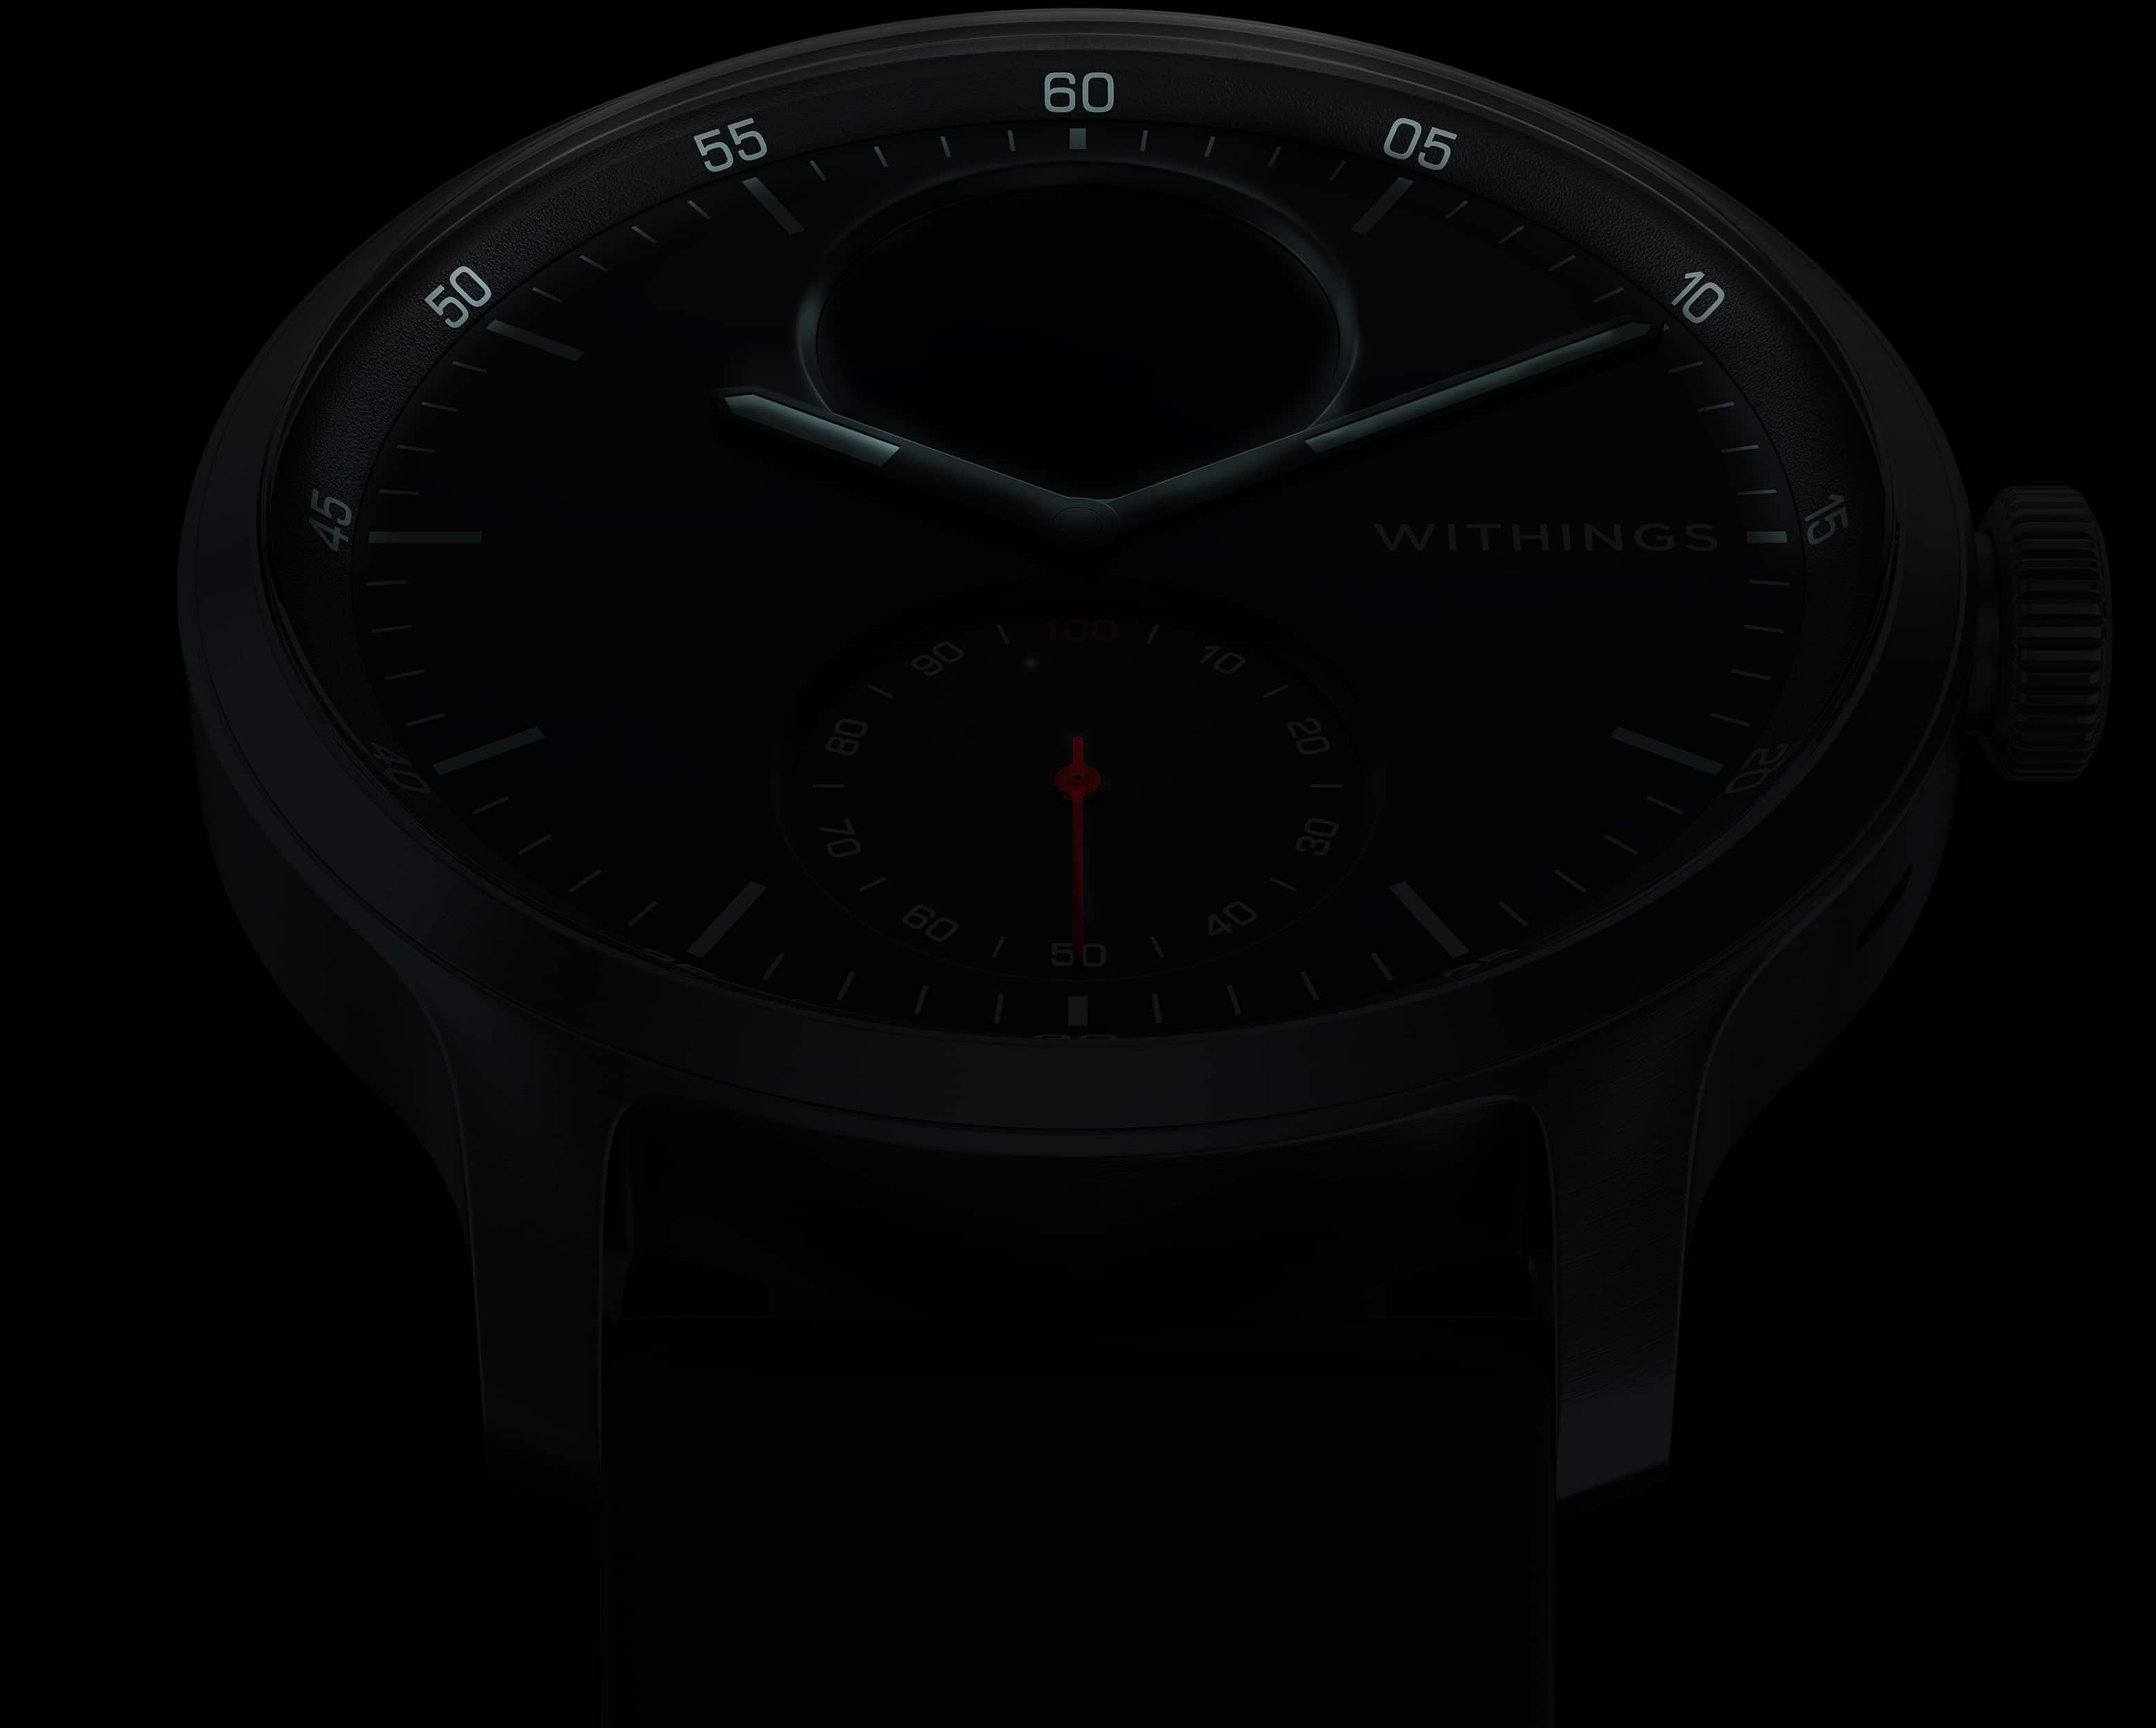 The world's first analog watch with clinically validated ECG